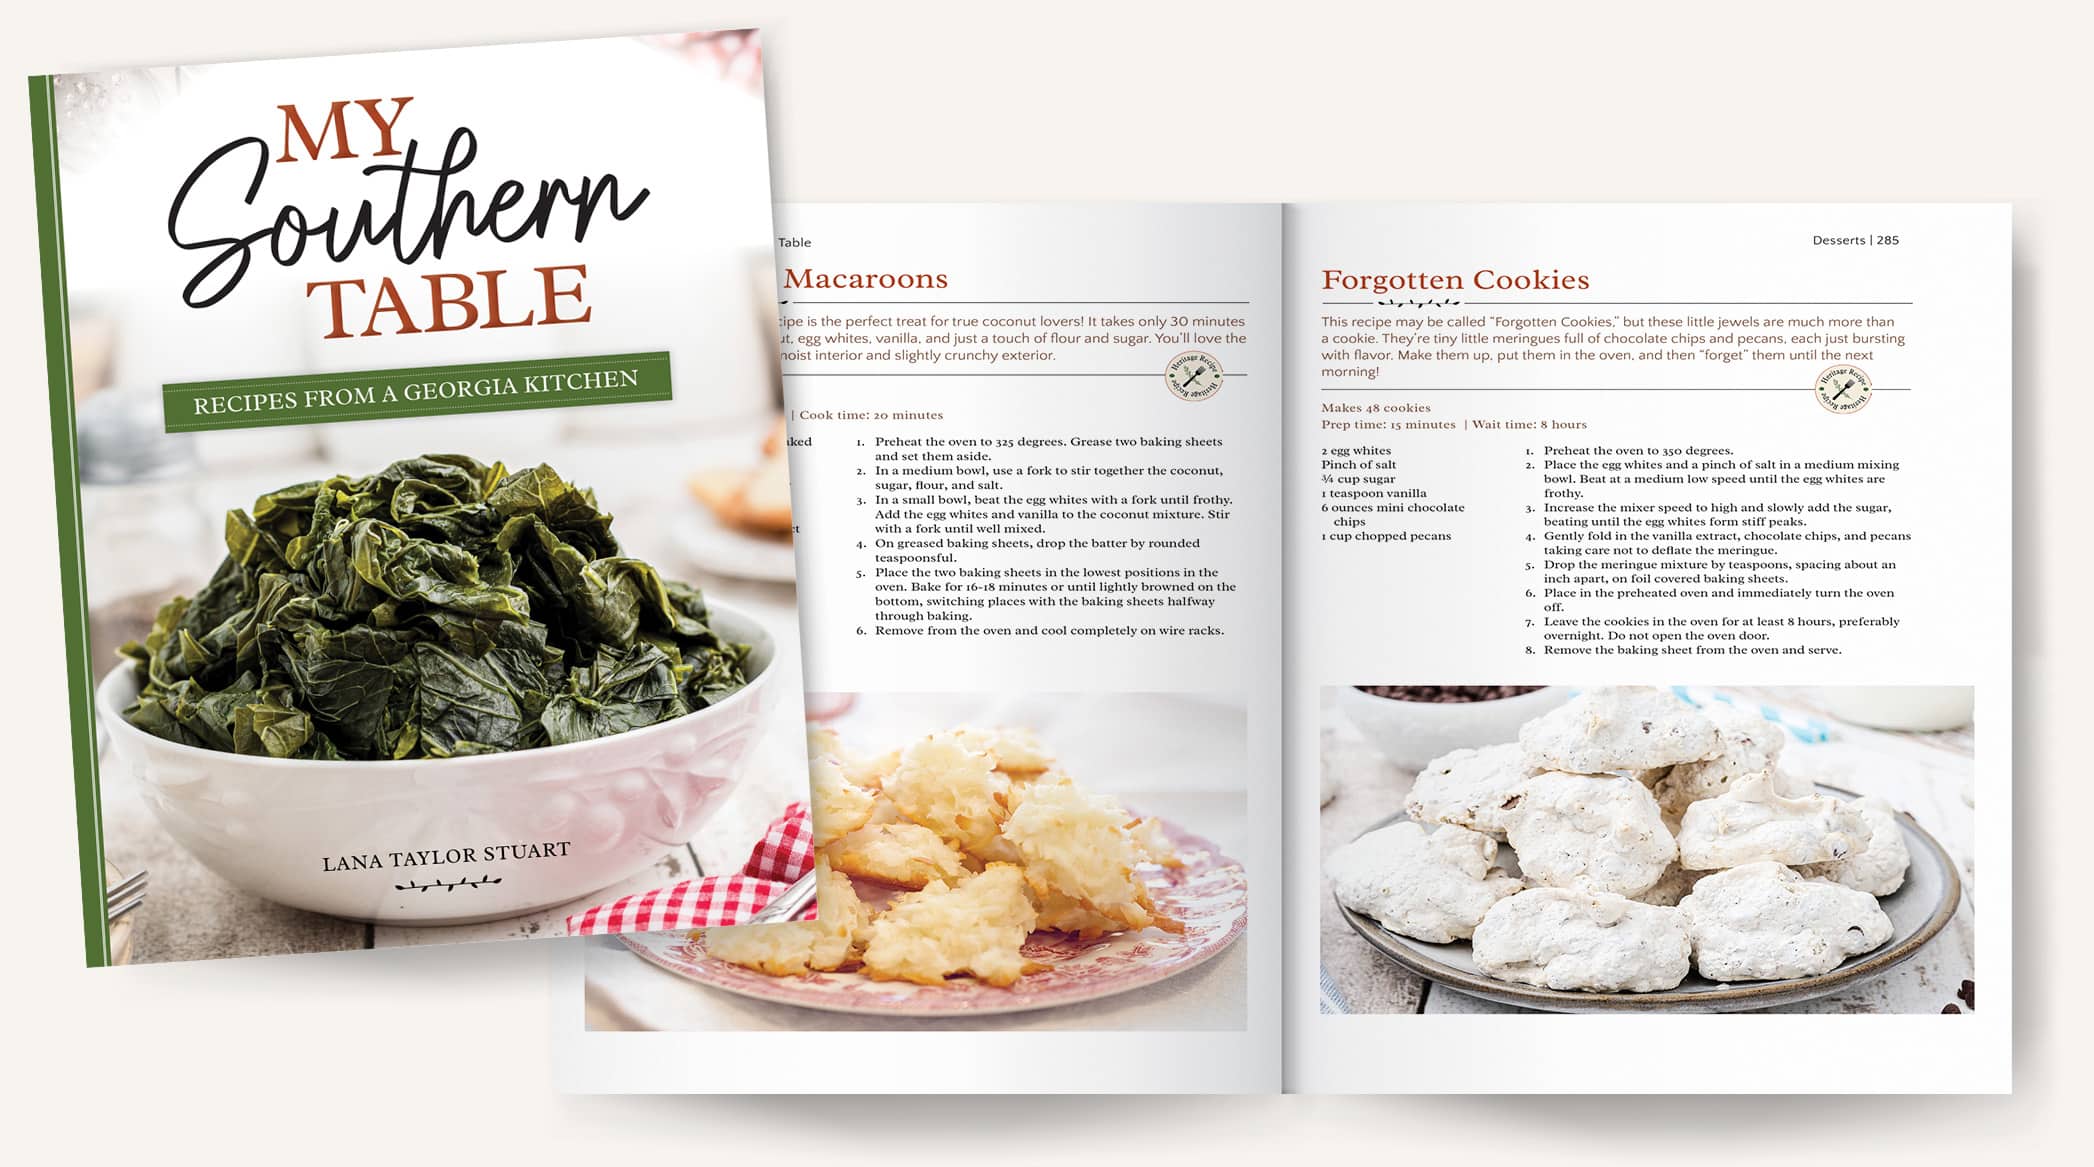 Mockup of pages 284-285 in My Southern Table cookbook.